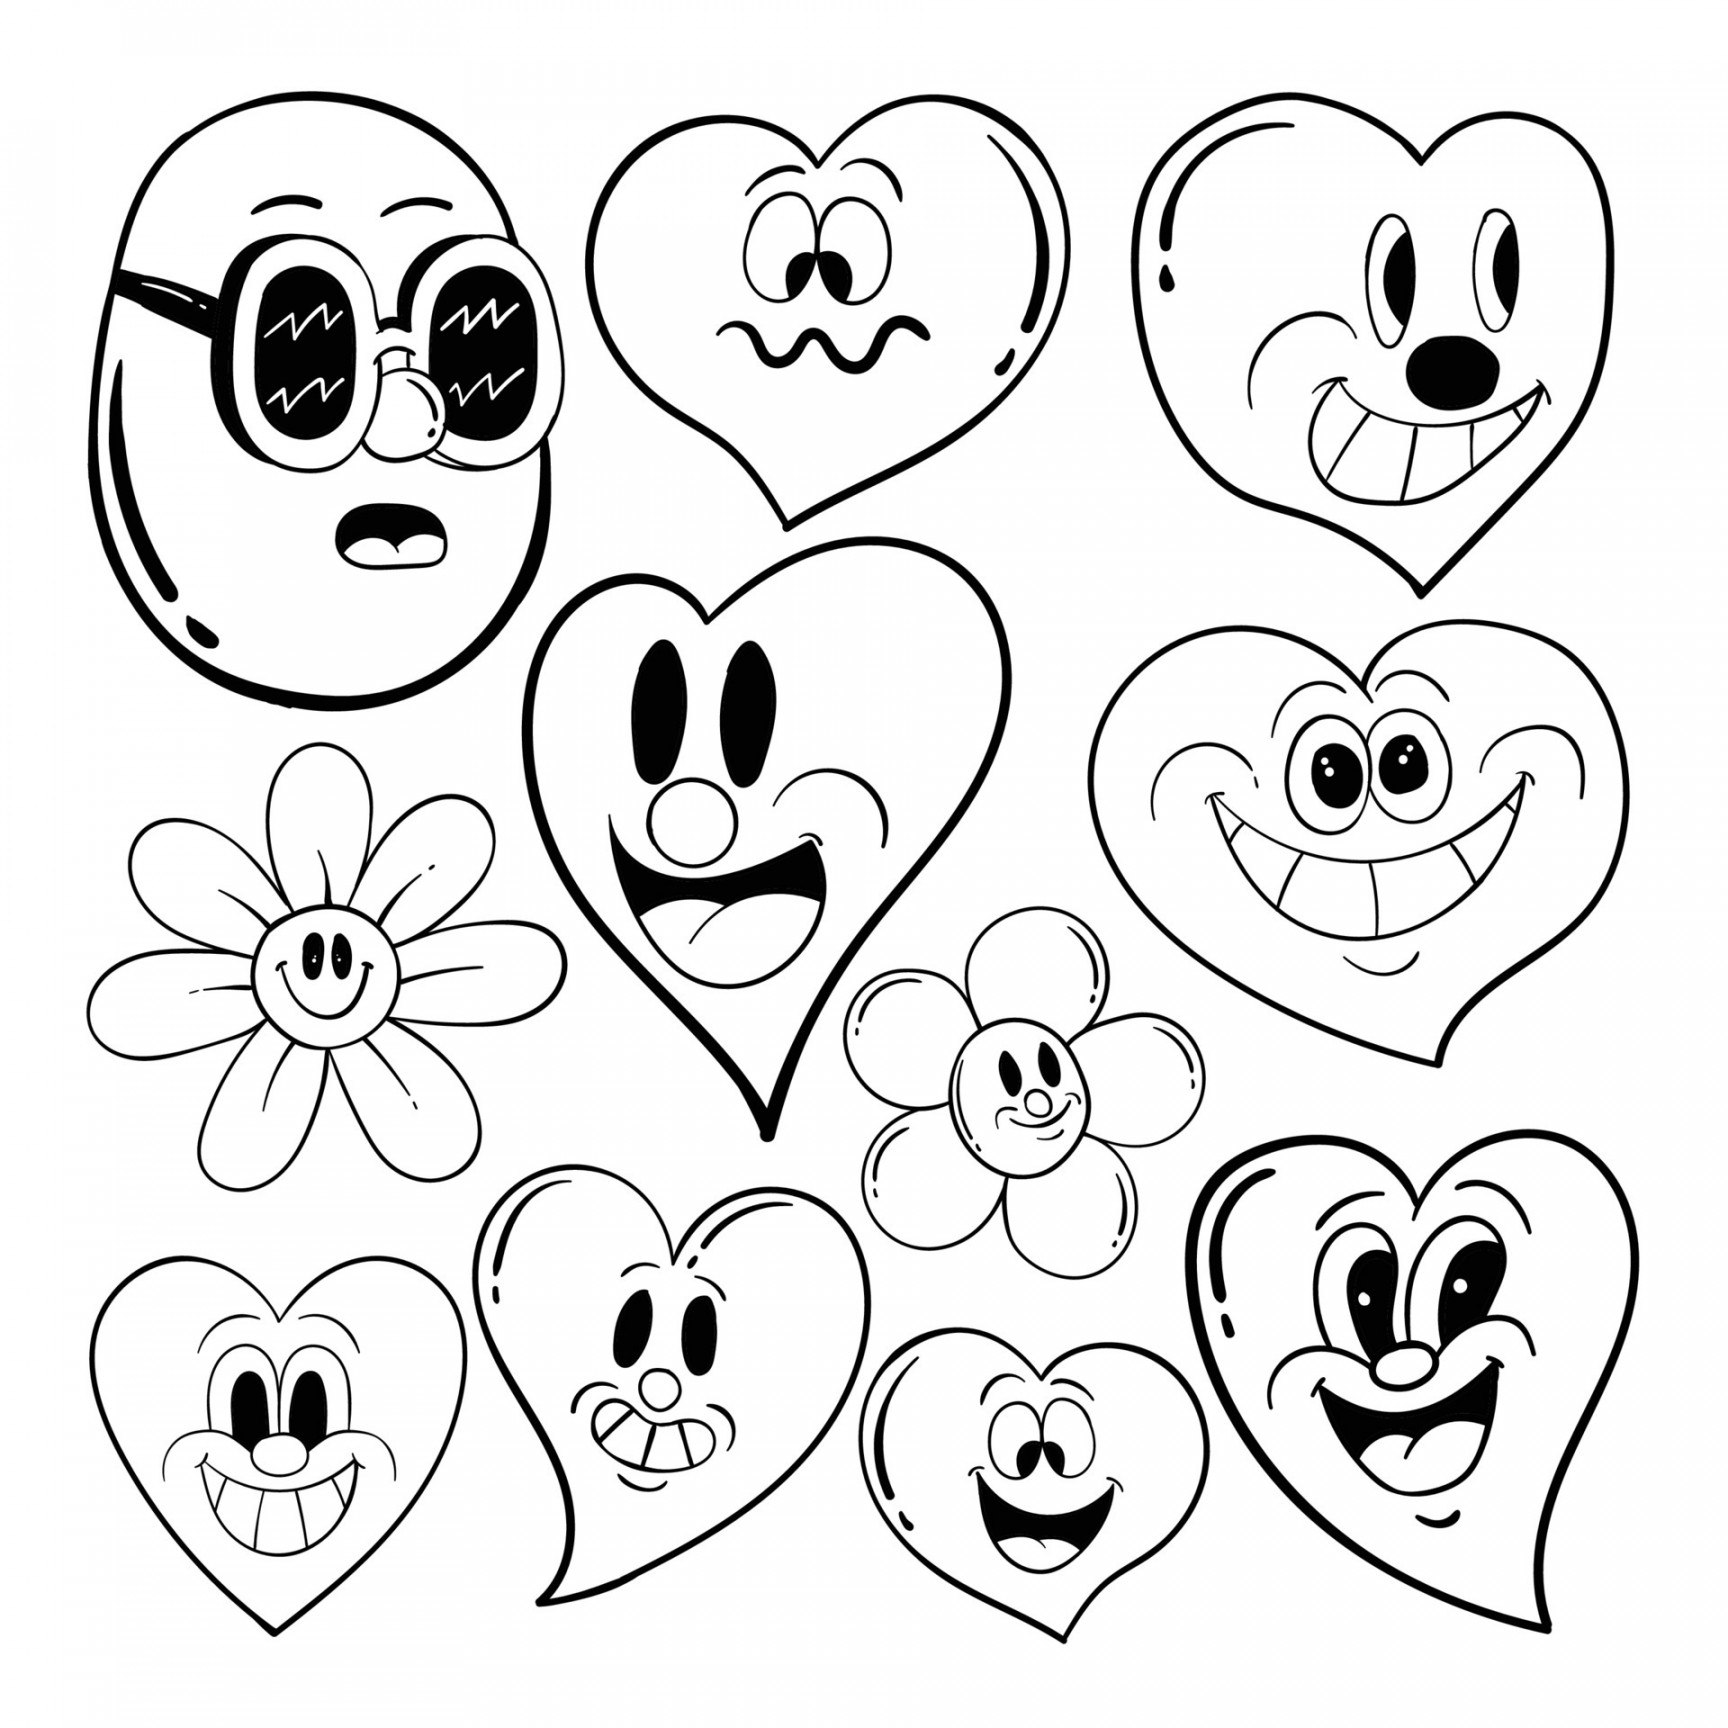 heart face doodle with hand drawn style, premium vector